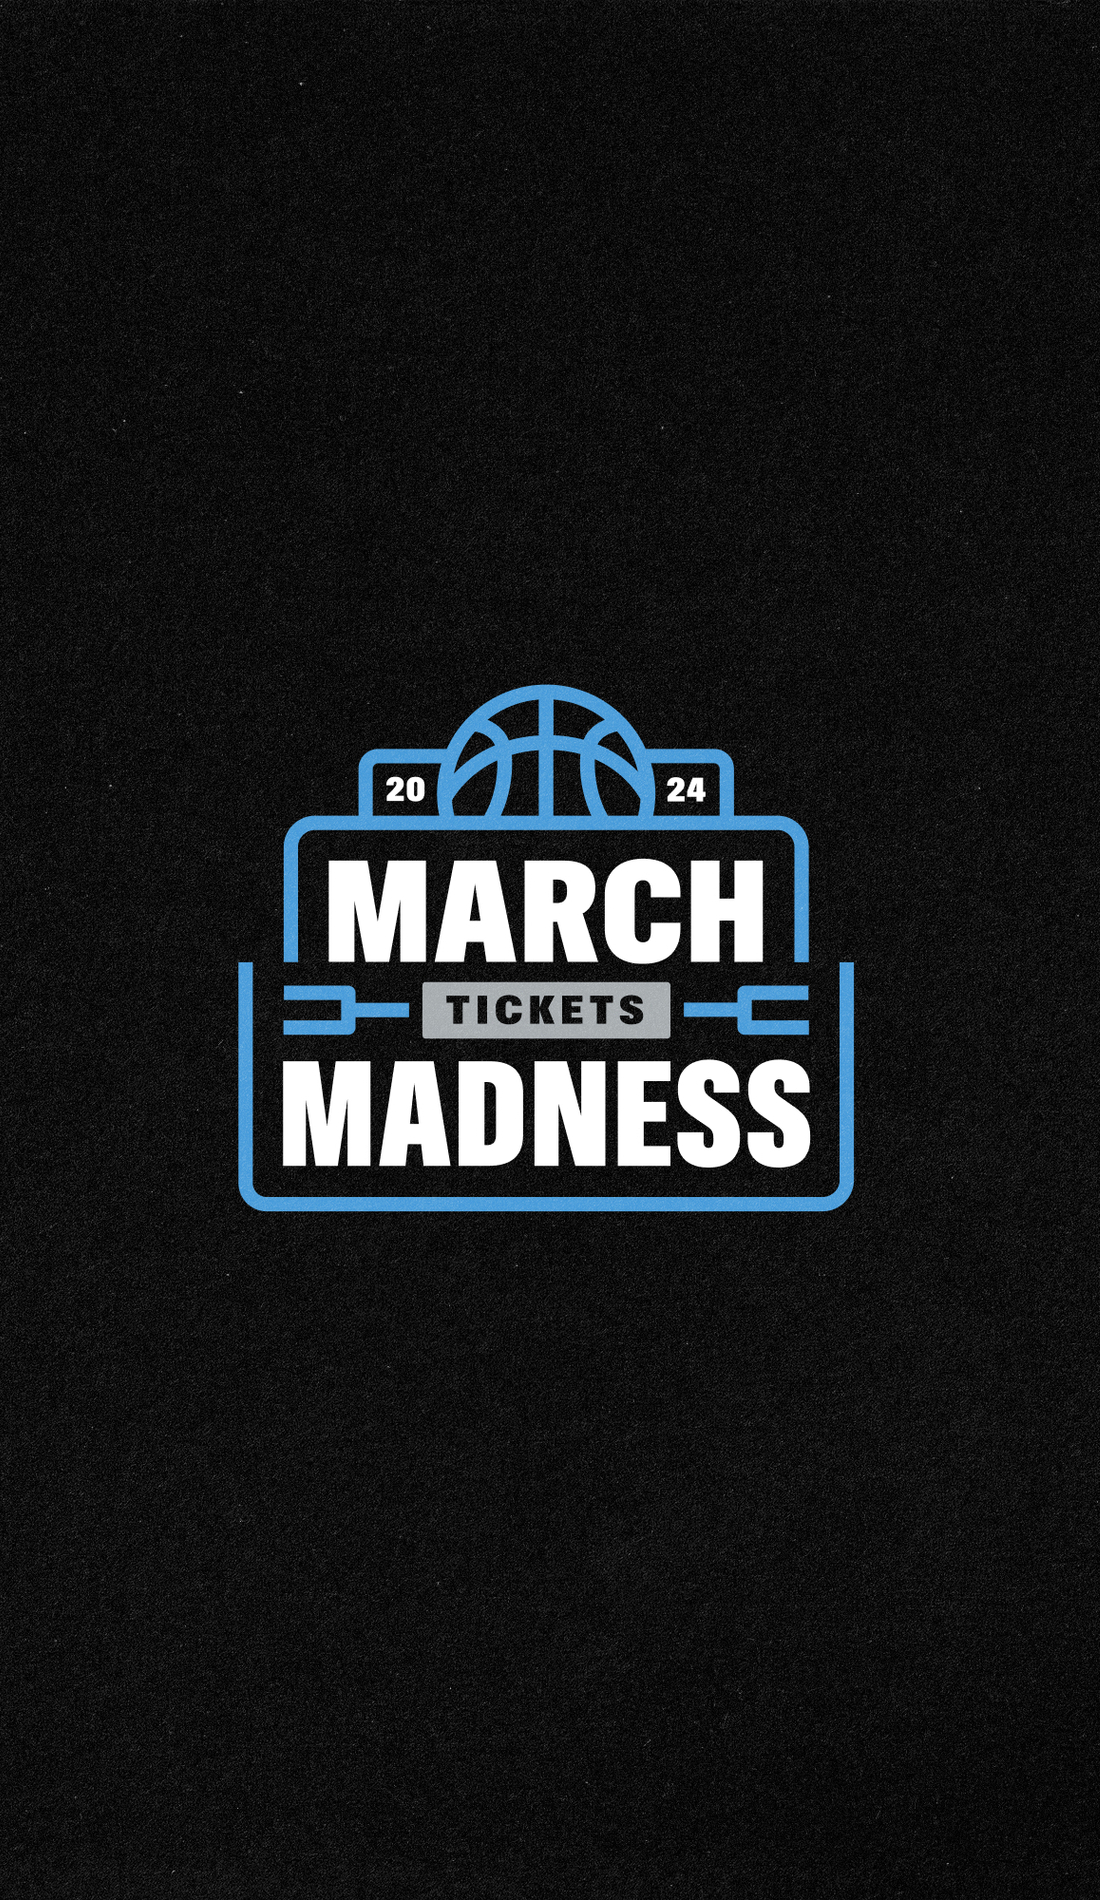 A March Madness live event